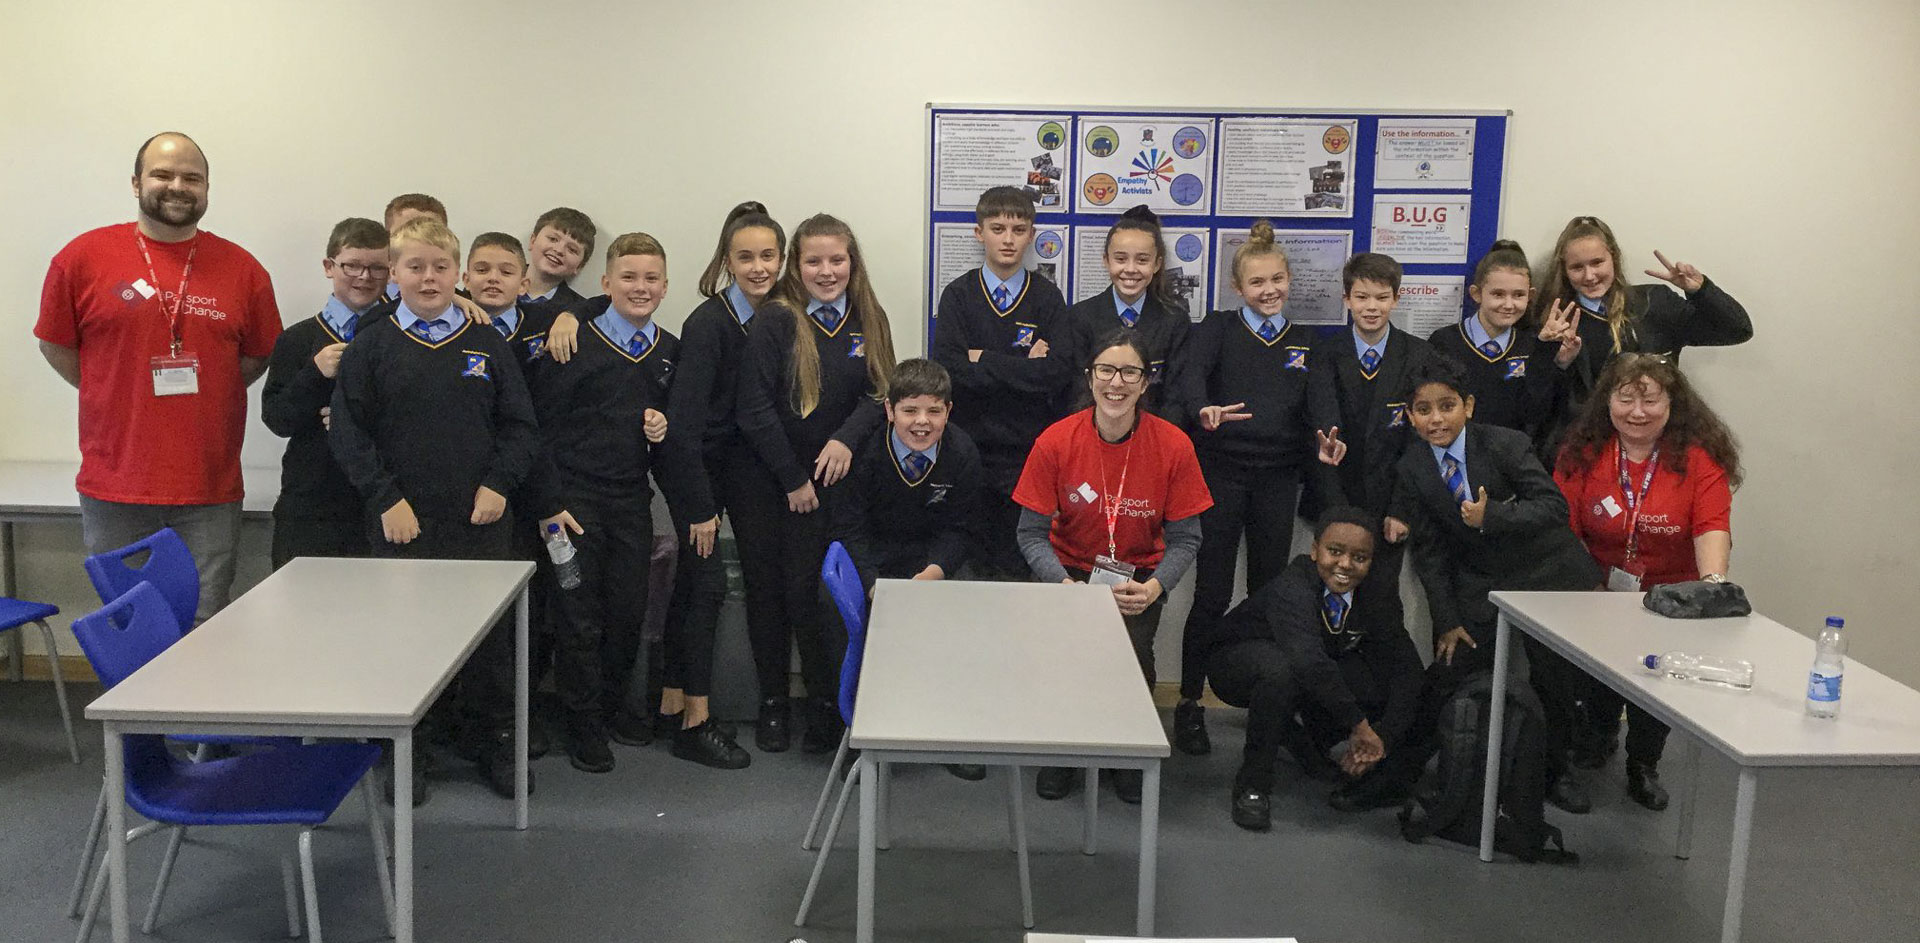 Laura joins our Swansea team to deliver a workshop on finance to Pentrehafod school.